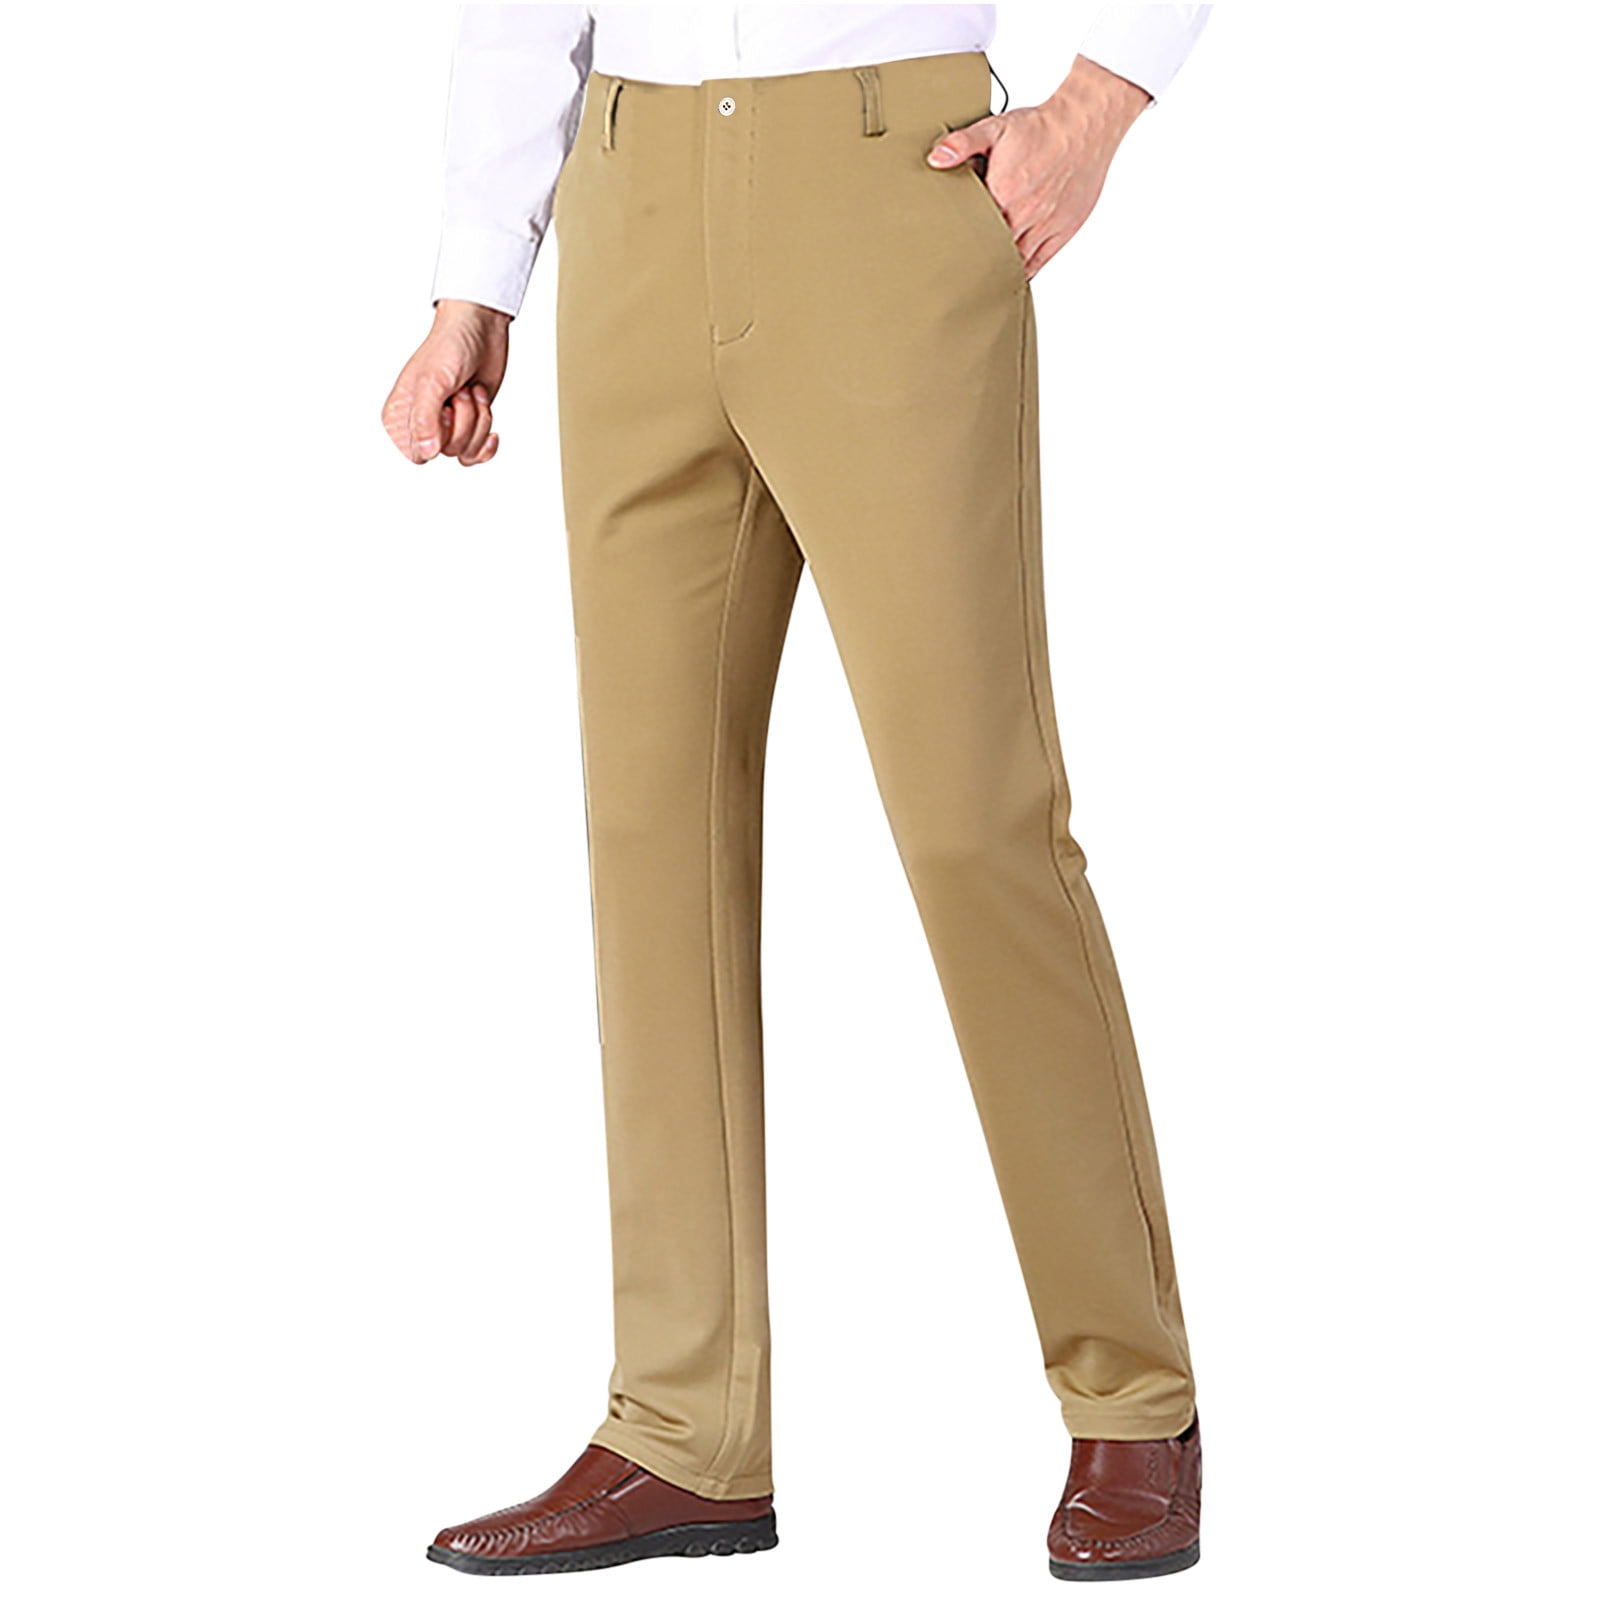 Ptauao Men Business Suit Pants Casual Formal Trousers Slim Fit Straight ...